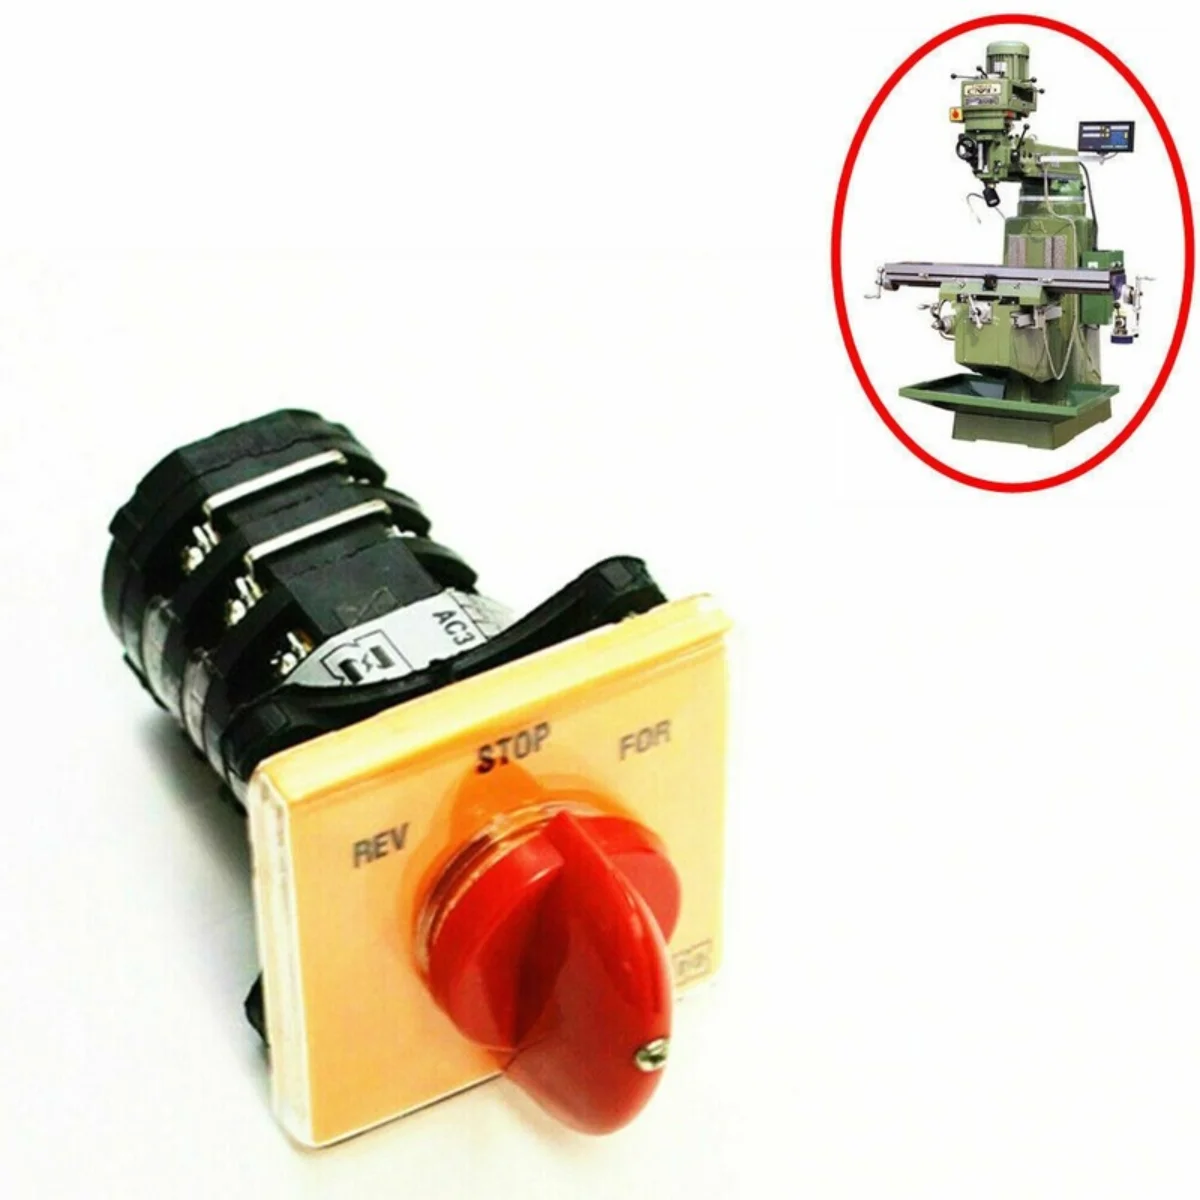 1pc Milling Machine Accessories Forward Reverse 3 Phase Motor Mill Switch NEW 3-Section Switch